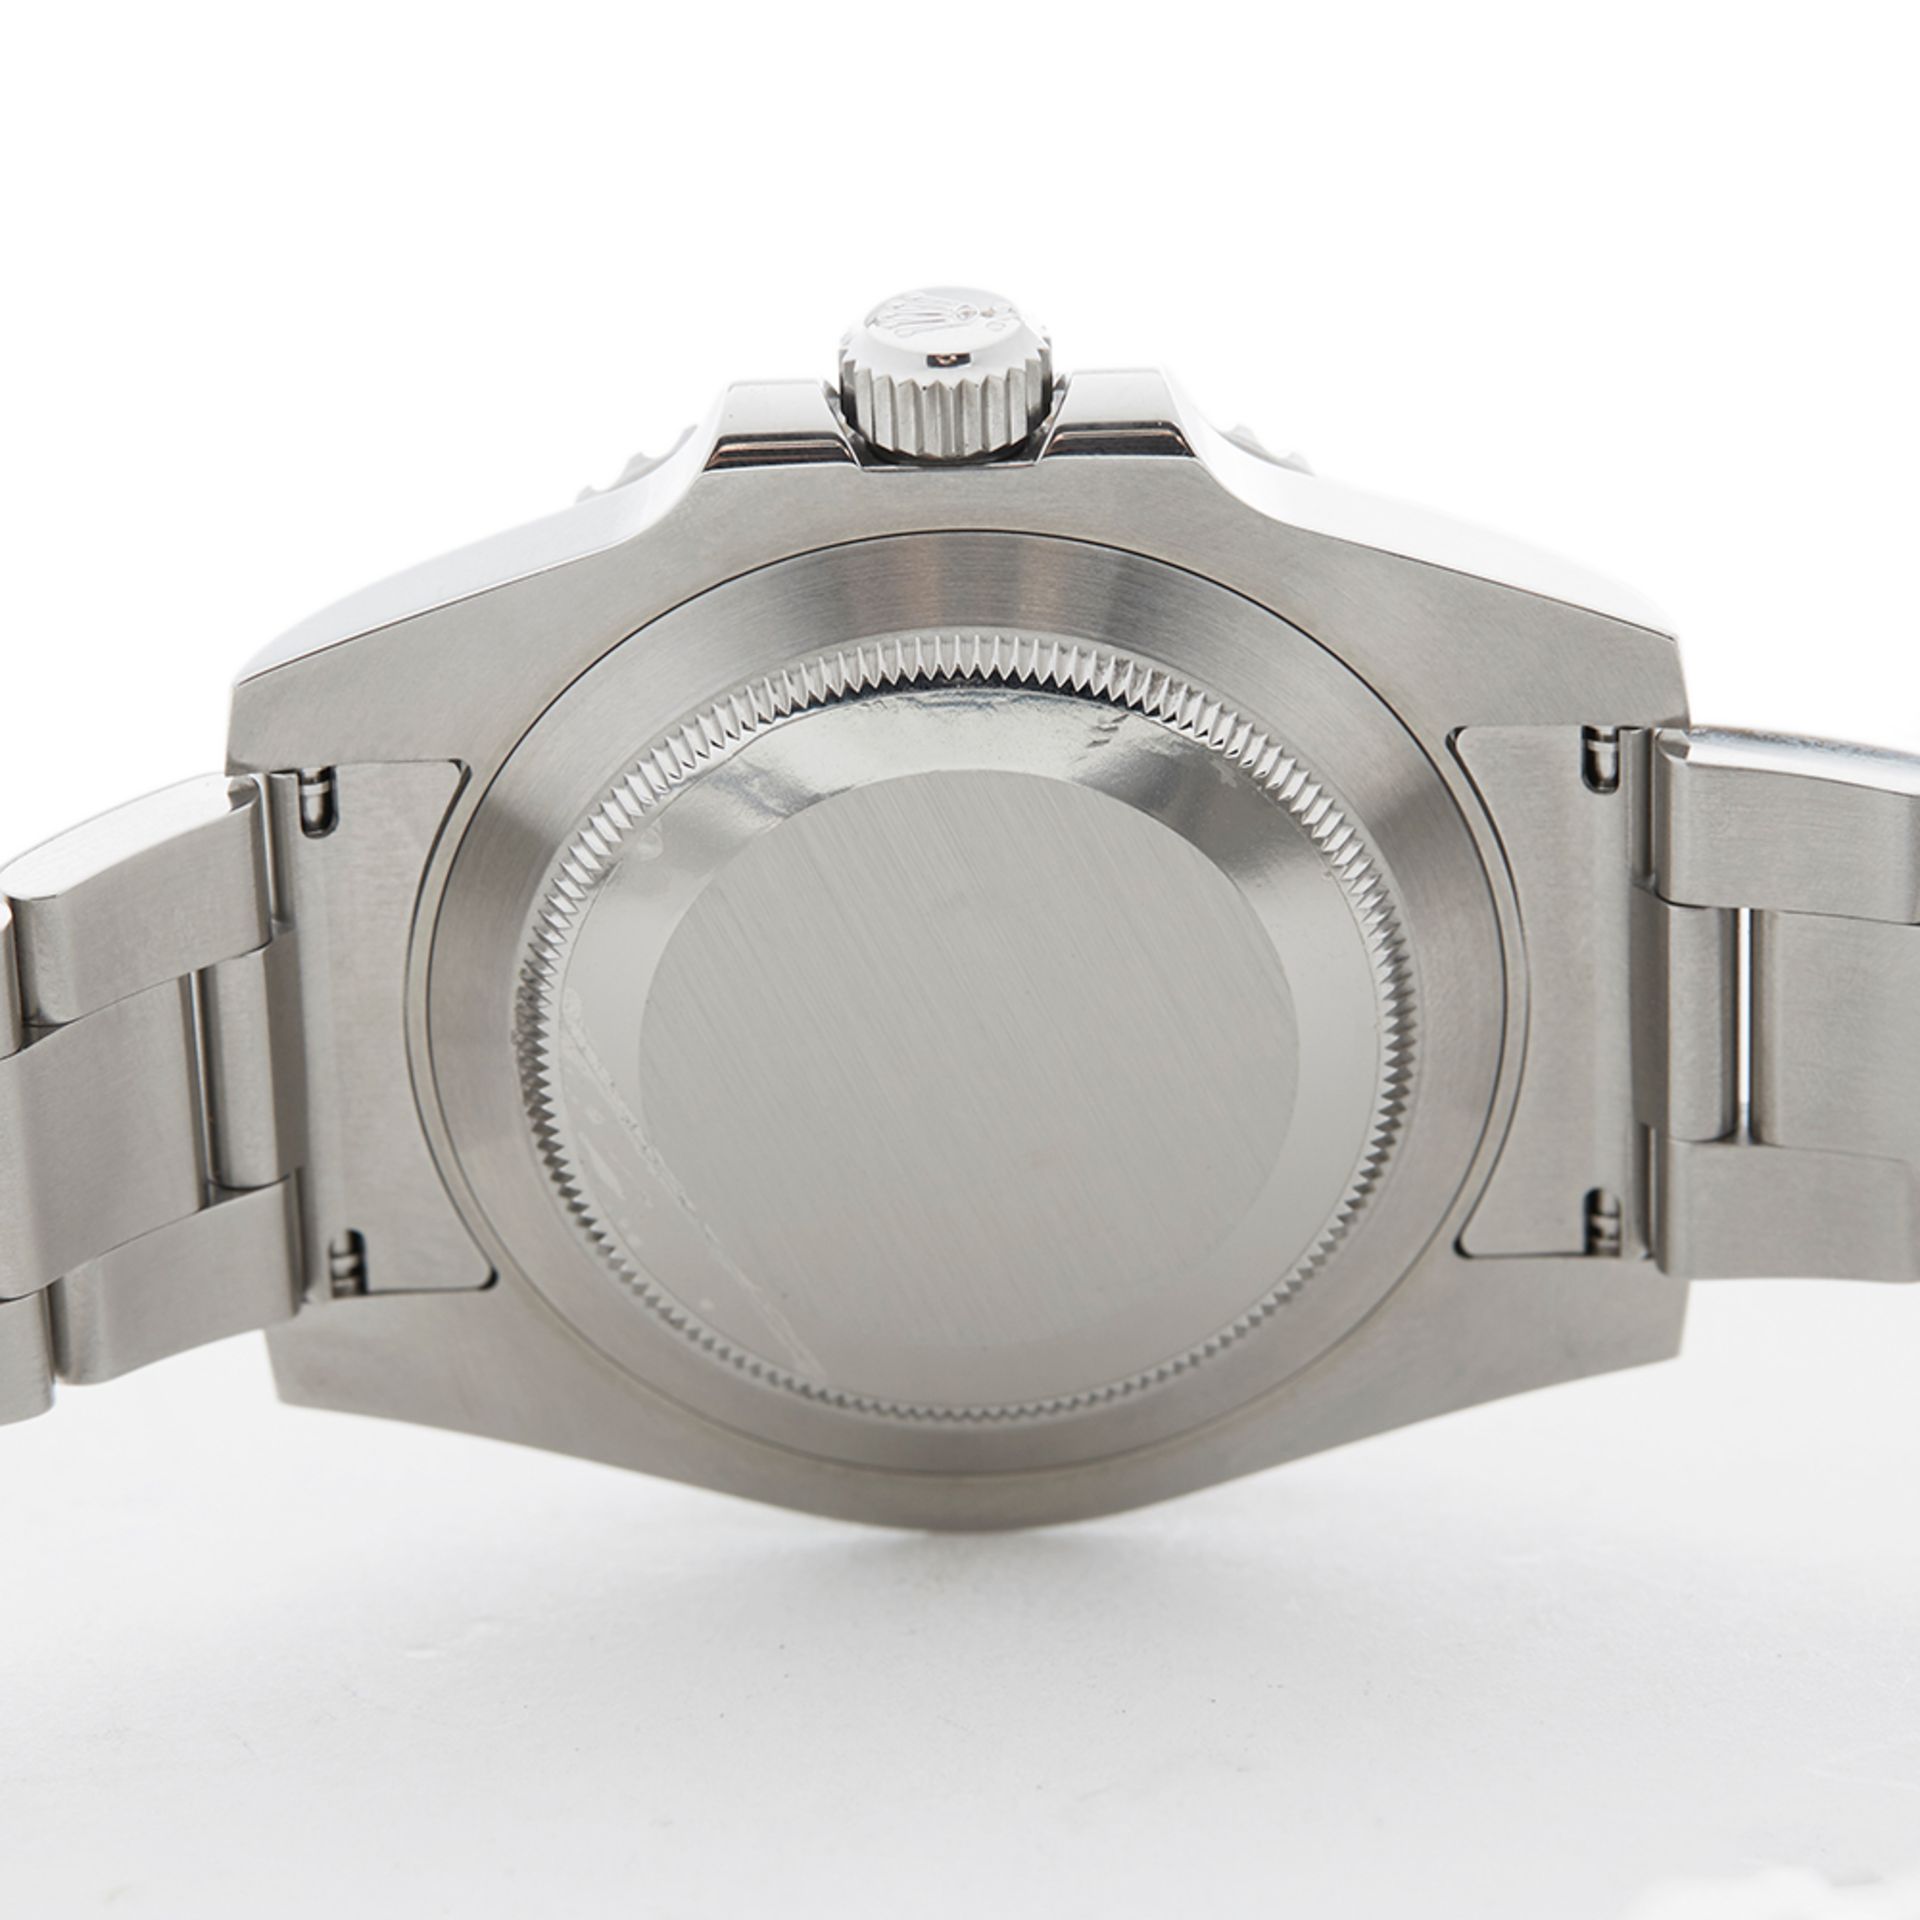 Submariner Non Date 40mm Stainless Steel 114060 - Image 8 of 9